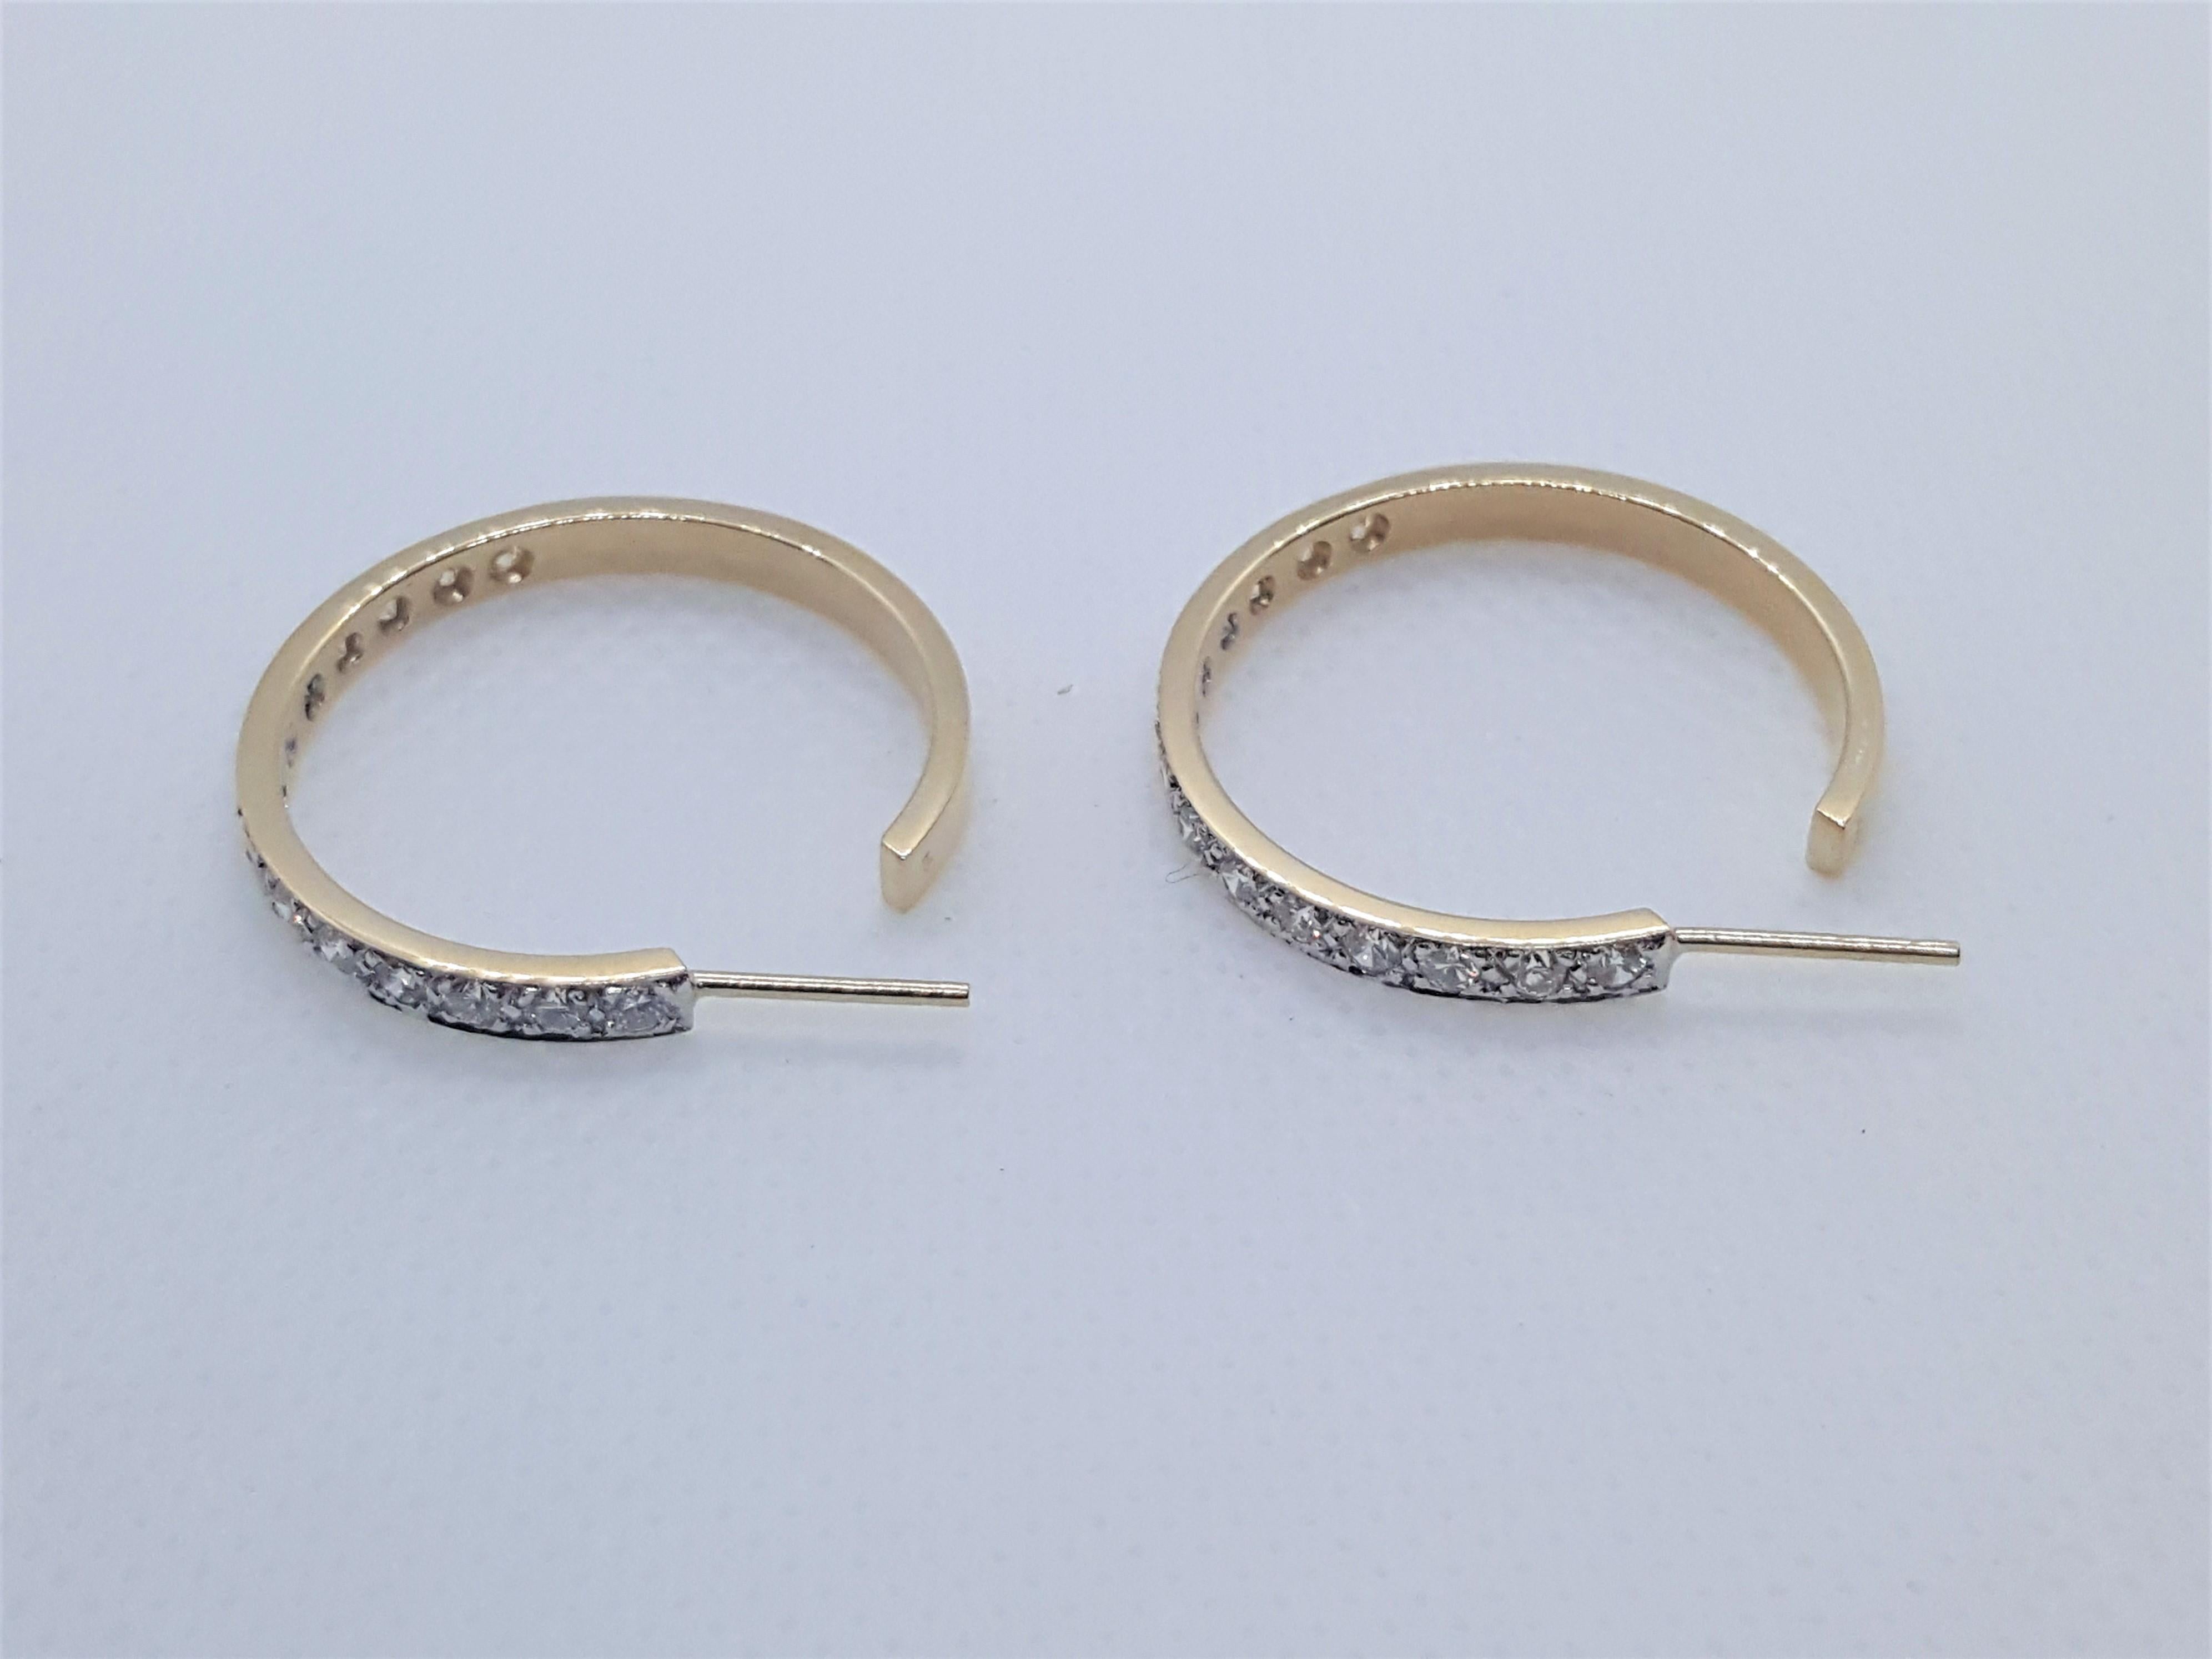 Round Cut 14kt Yellow Gold .30cttw Bead Set Diamond Hoop Earrings Friction Posts For Sale